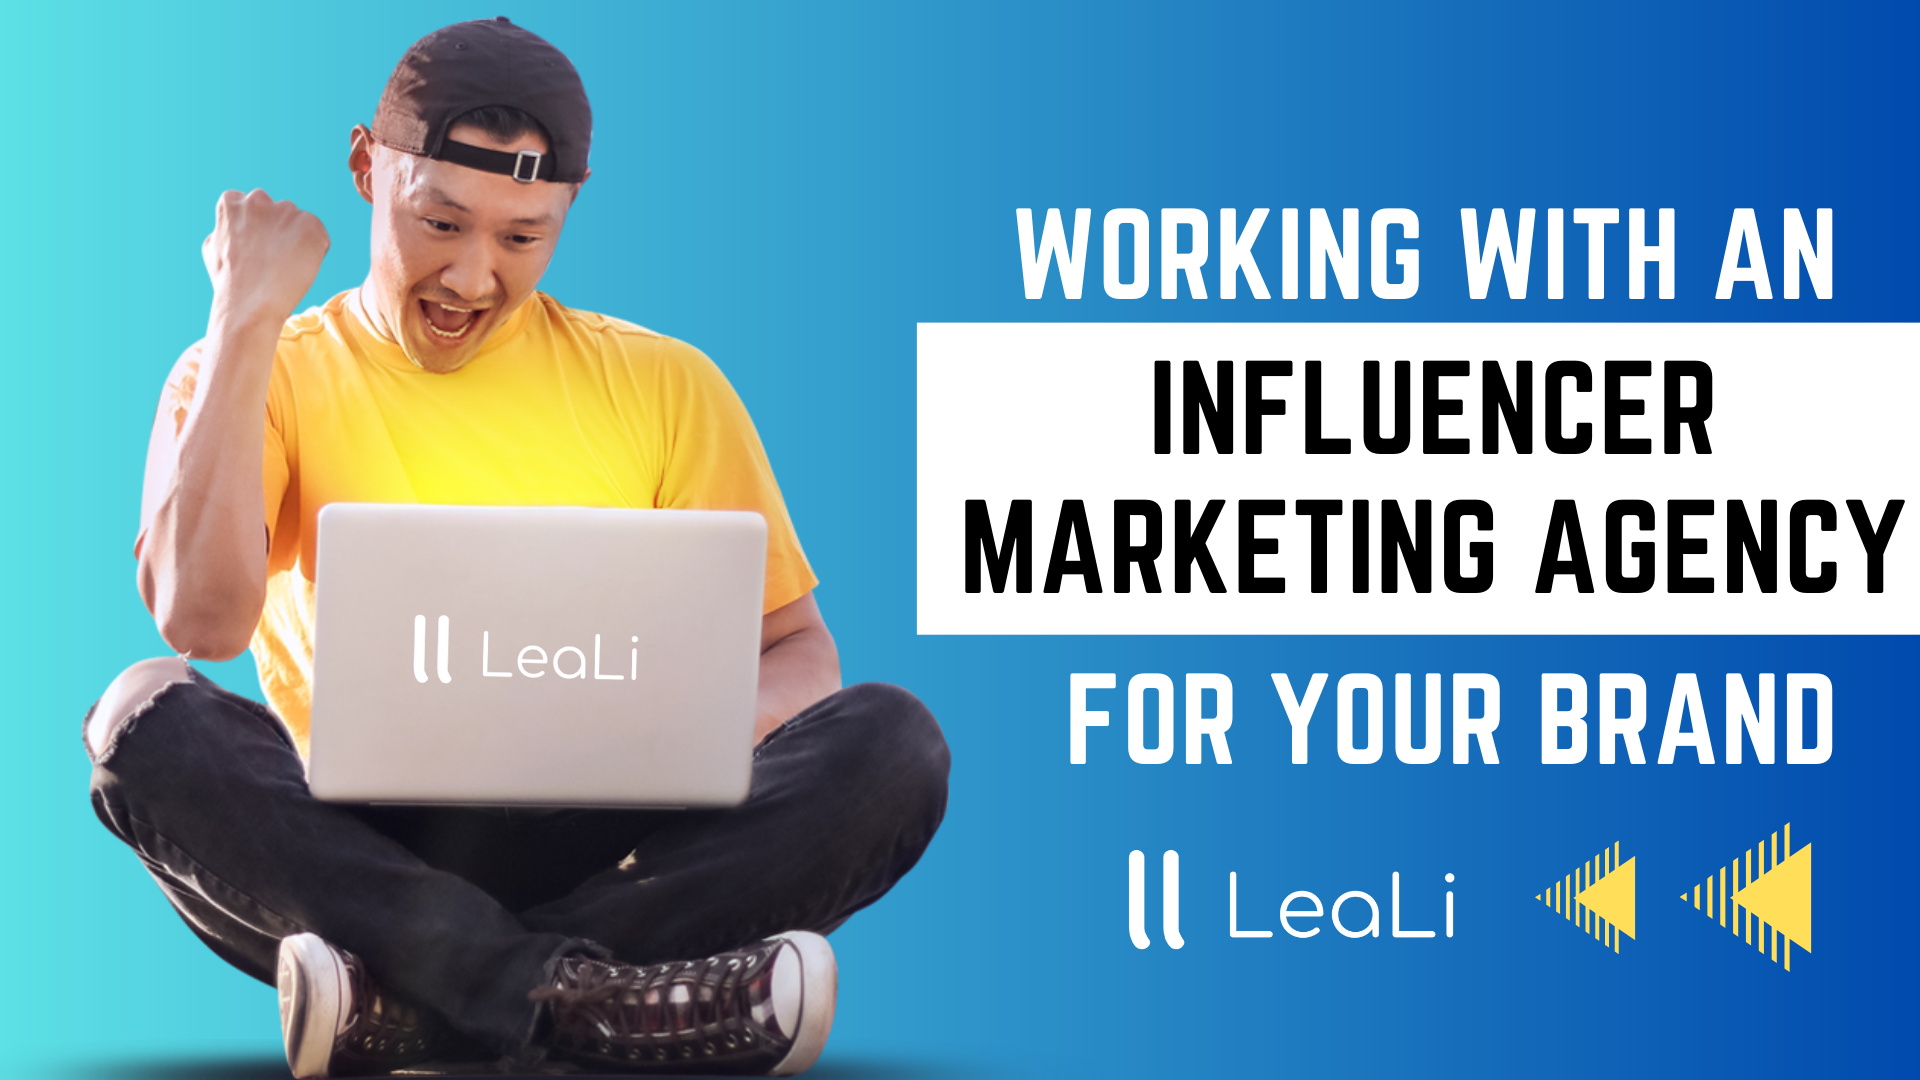 Working With an Influencer Marketing Agency for Your Brand